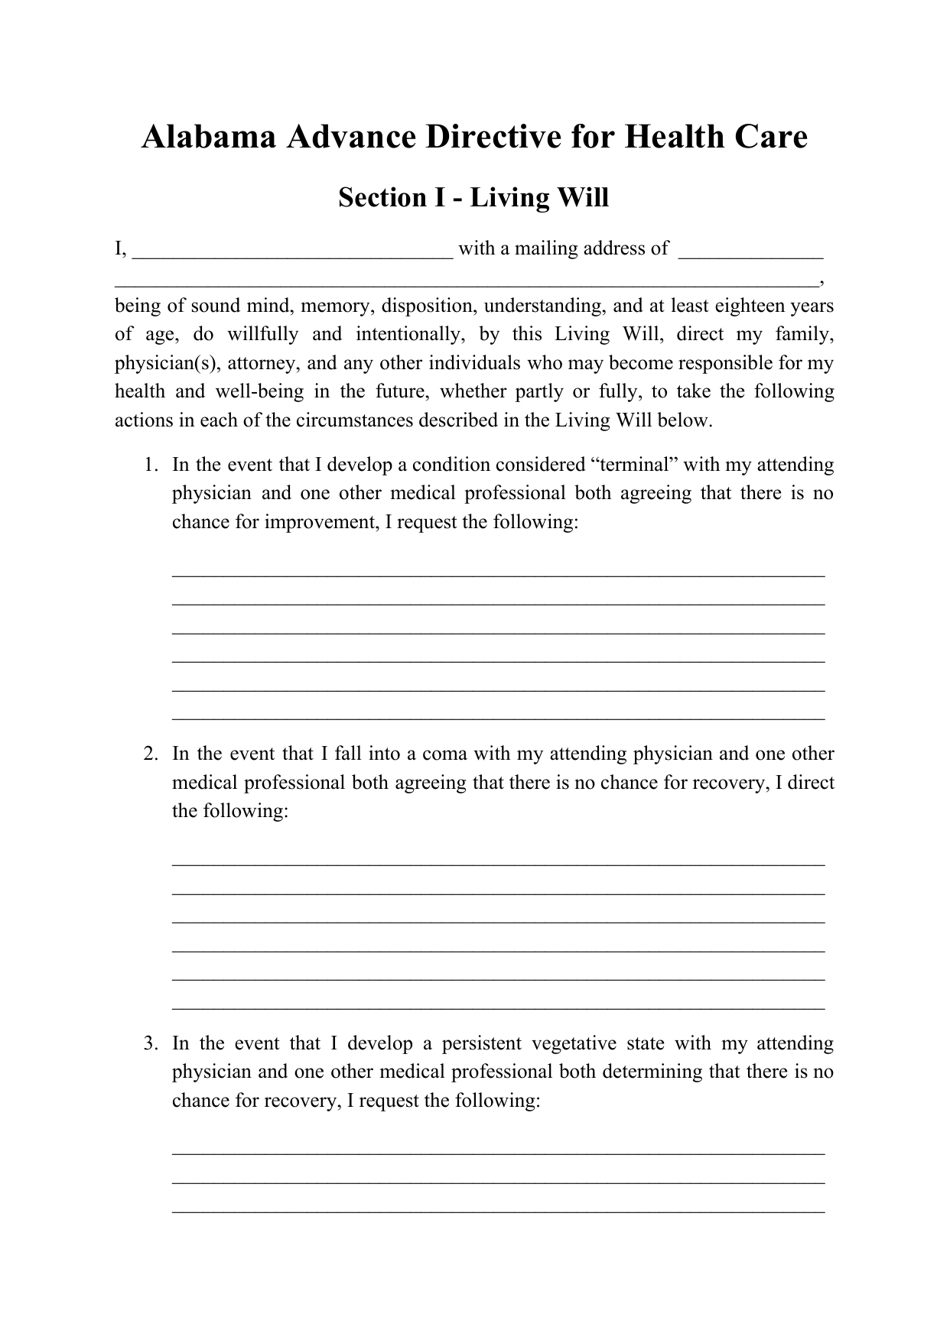 Advance Directive for Health Care Form - Alabama, Page 1